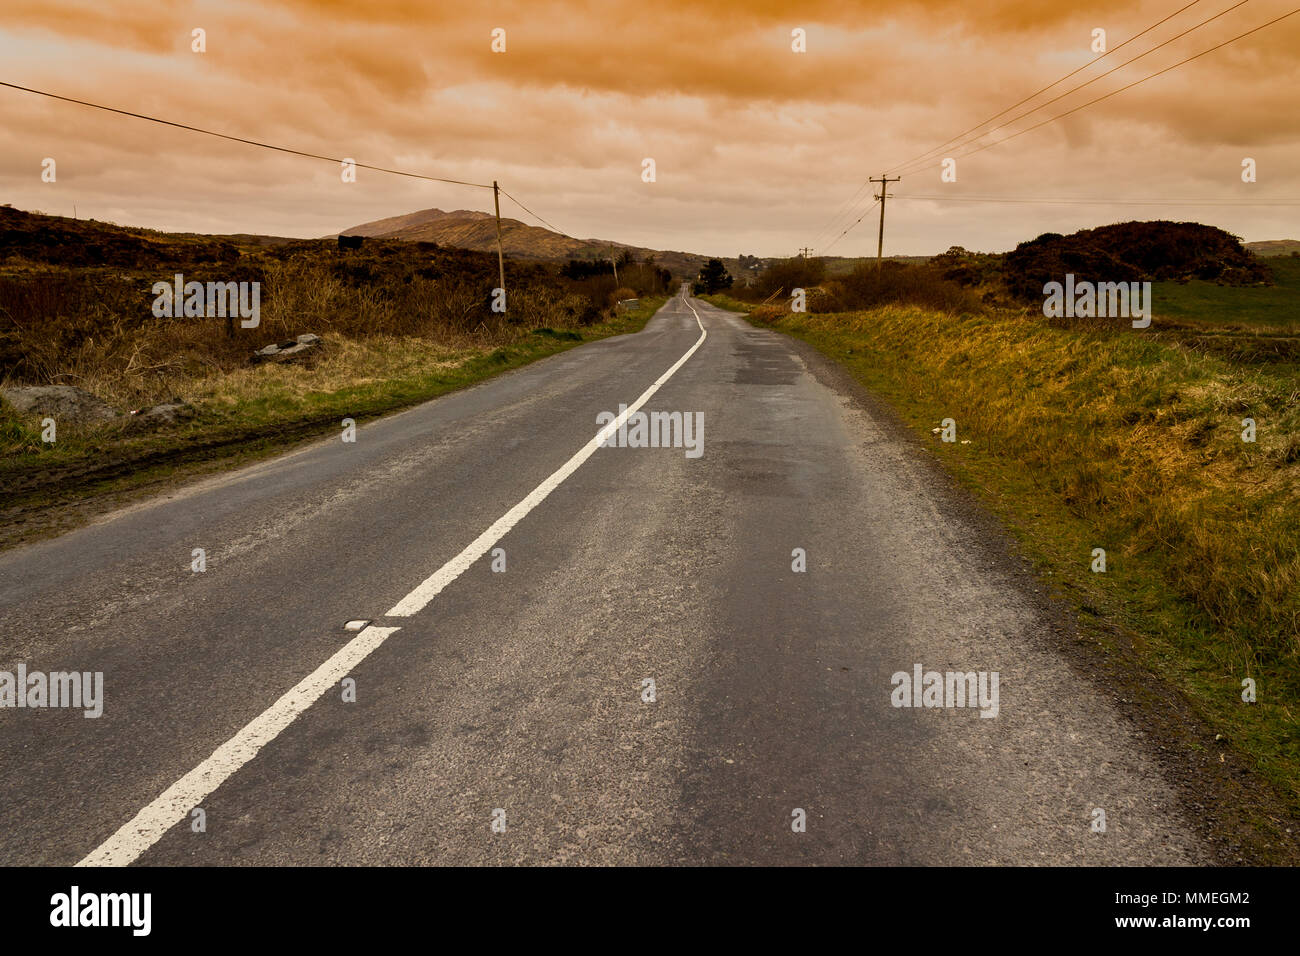 Straight empty road in the irish landscape under storm clouds with the evening light casting shadows. Stock Photo